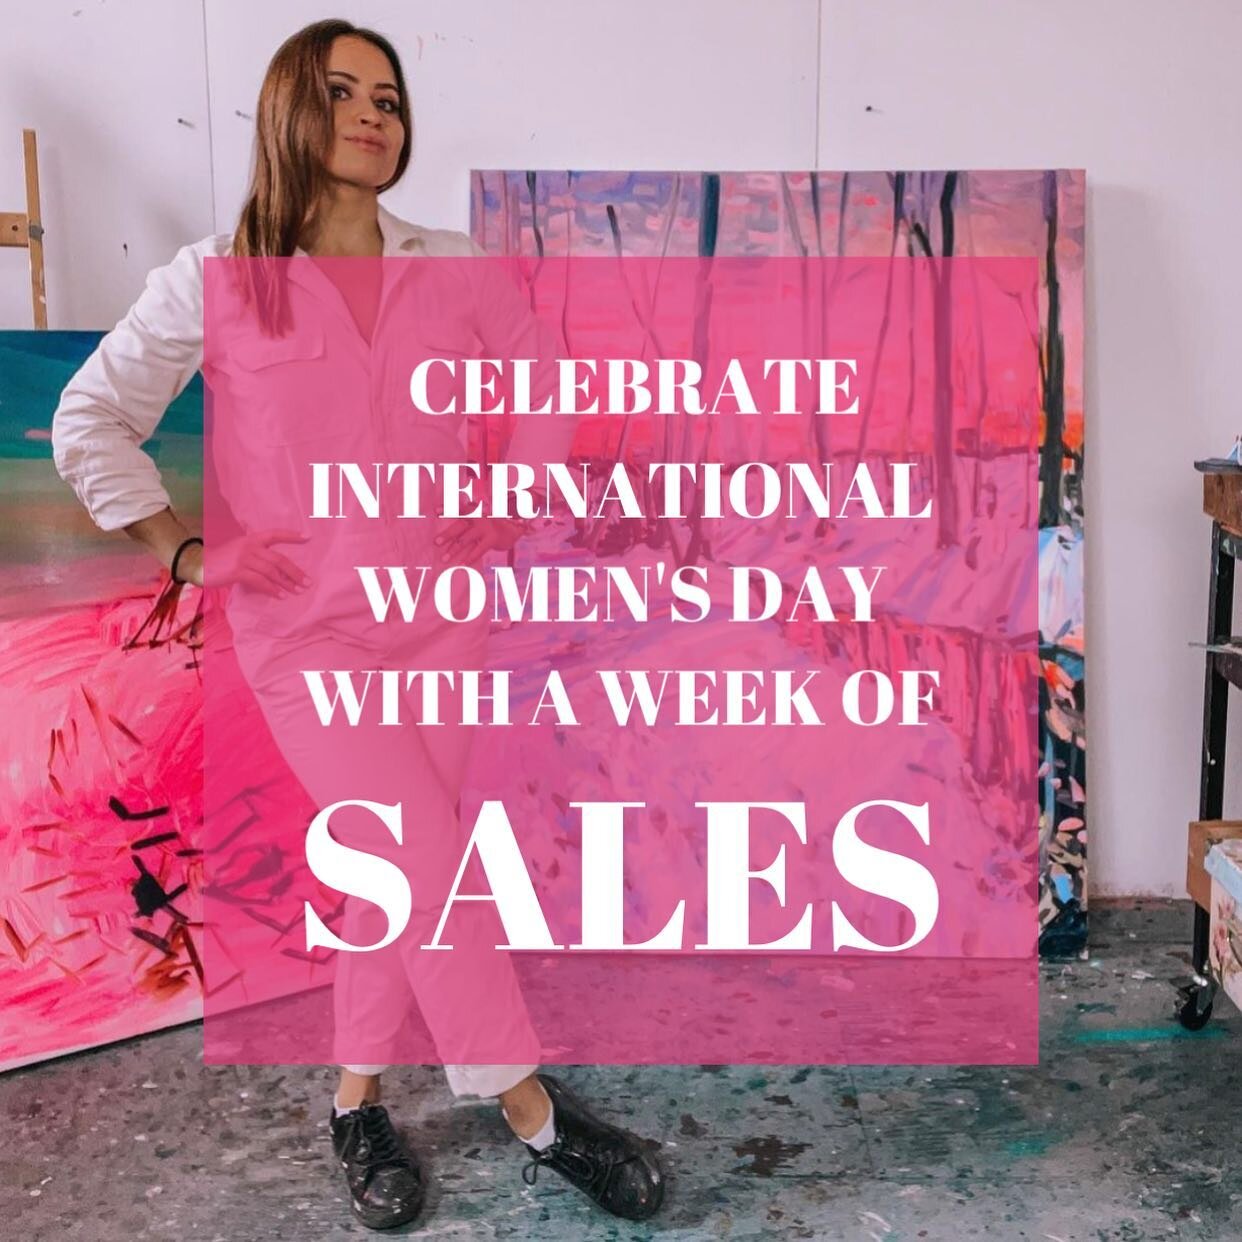 Join us as we celebrate 
International Women&rsquo;s Day 🎊 🎉 
SALE  SALE  SALE

Today we recognize and thank @katerinaspopova for her artistic talent, wonderful art magazine and art community @createmagazine and for her passion and inspiration to m